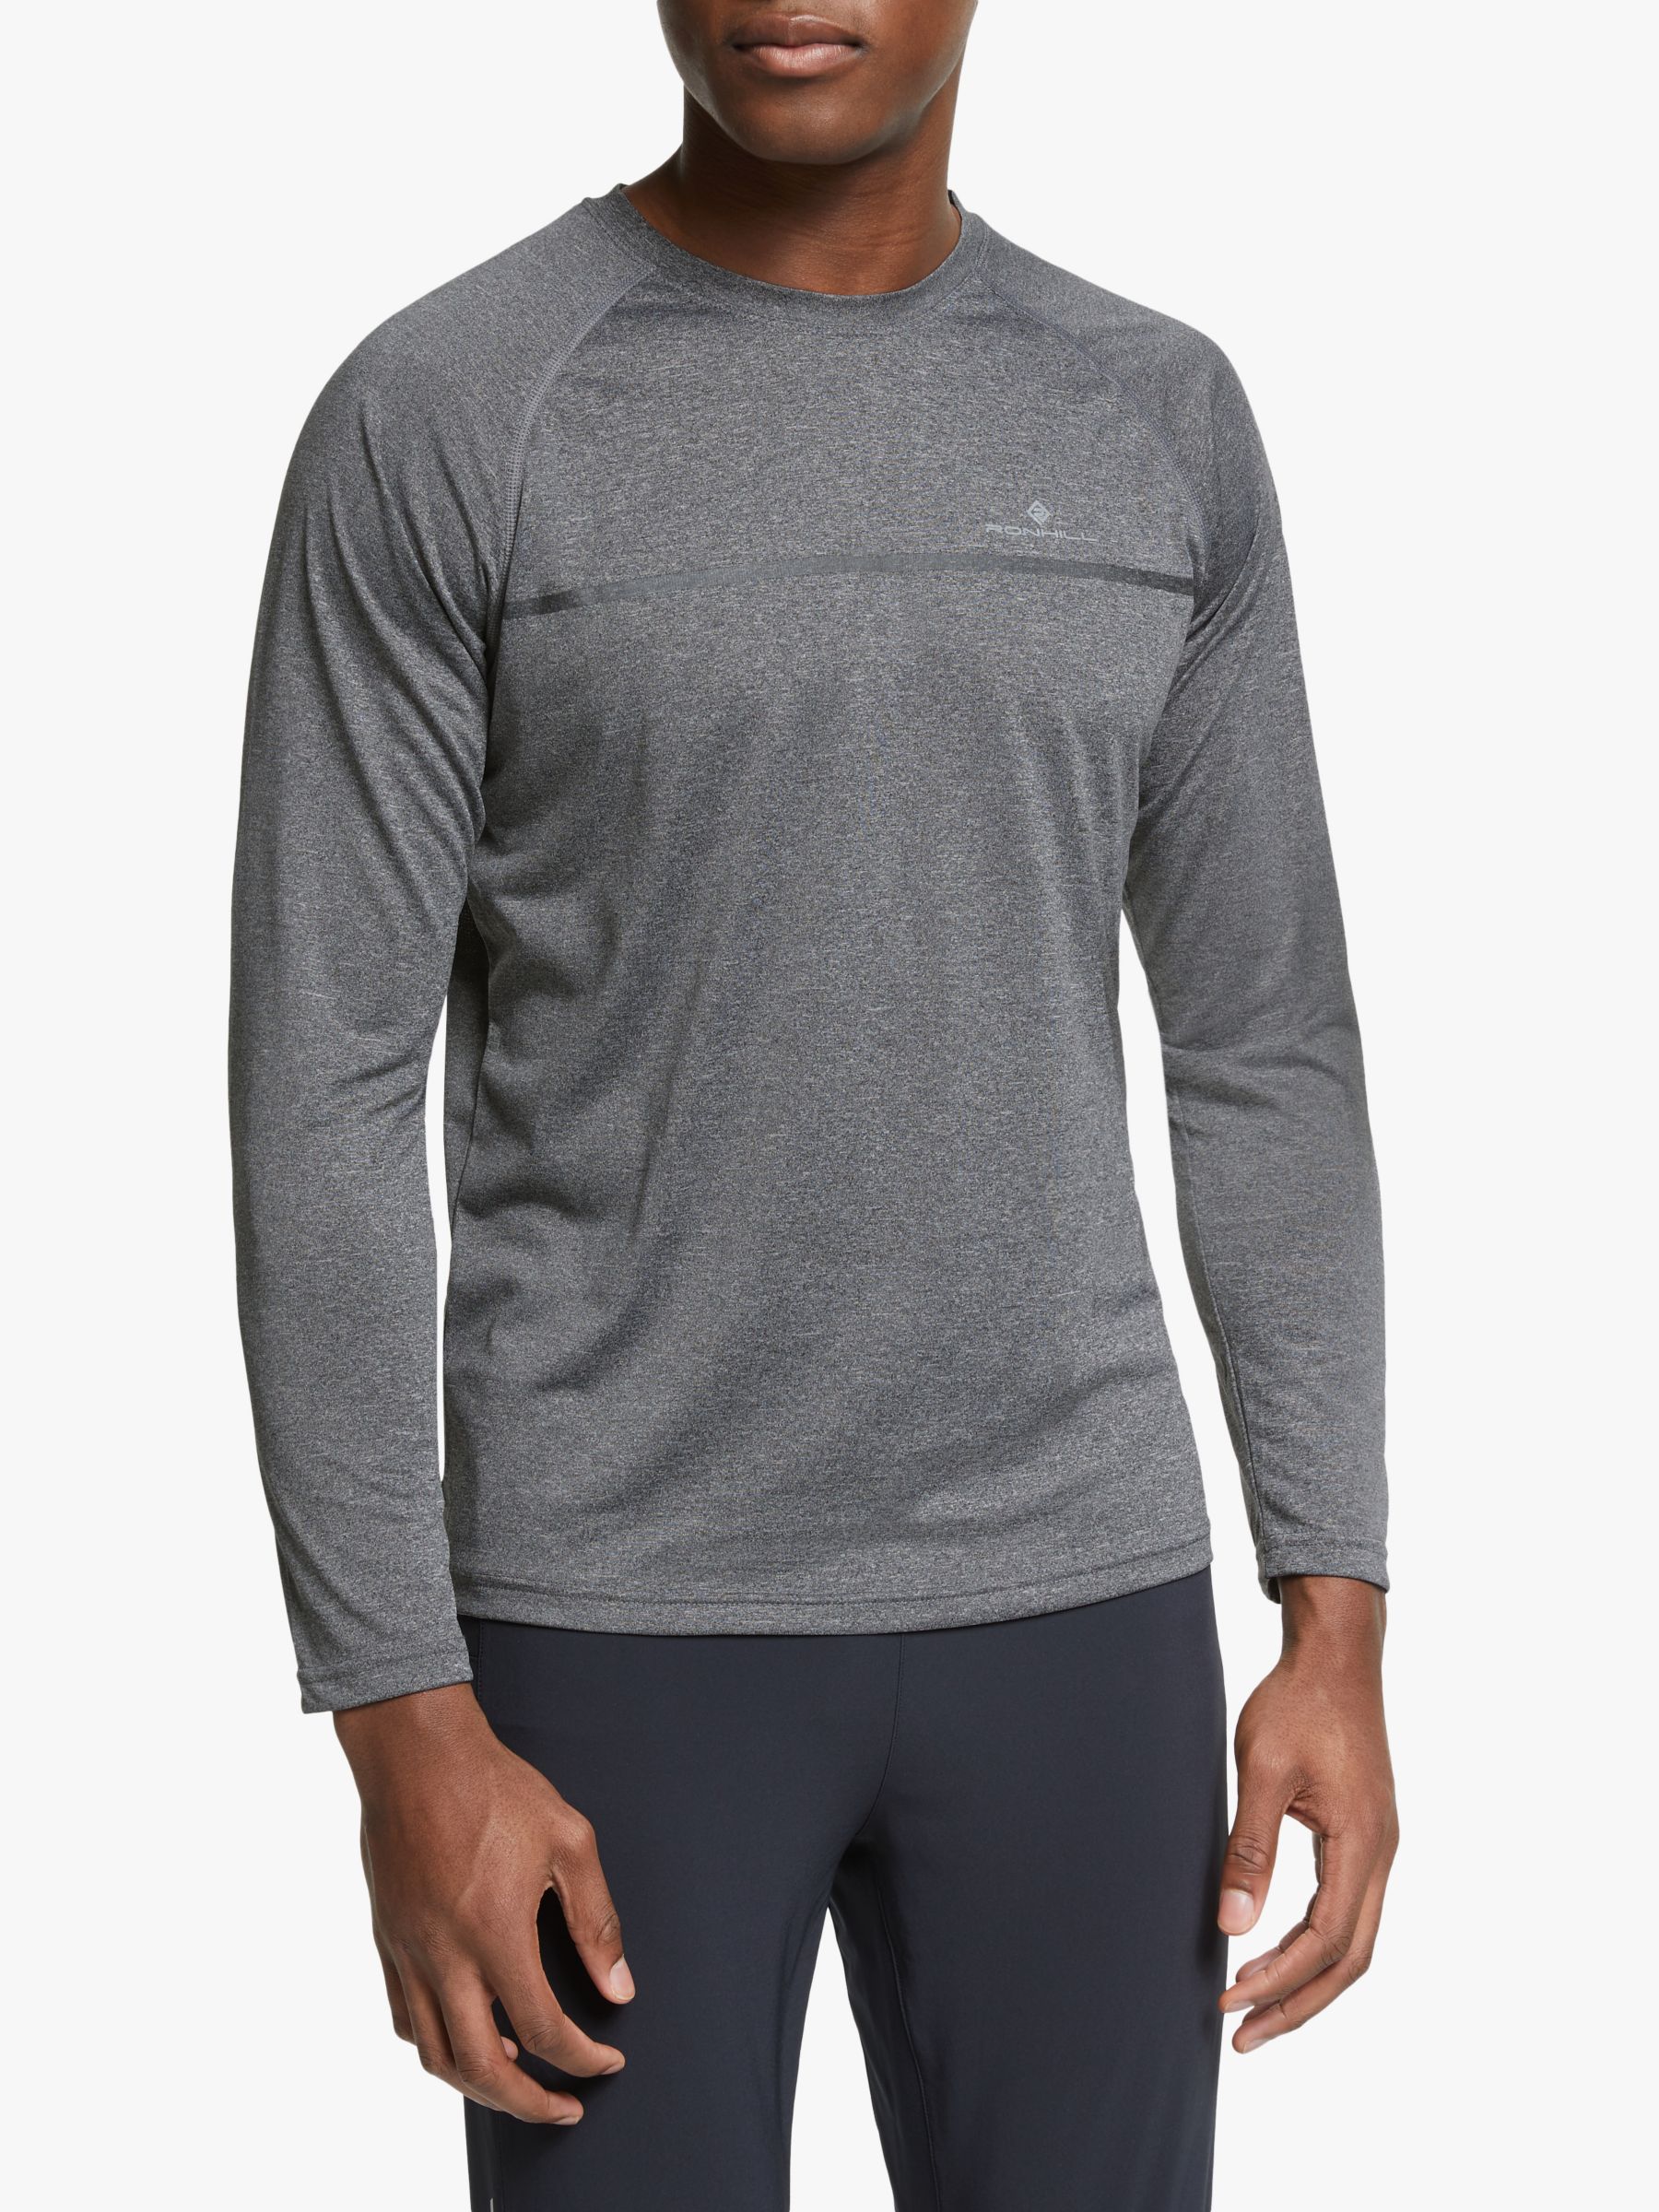 Ronhill Everyday Long Sleeve Running Top